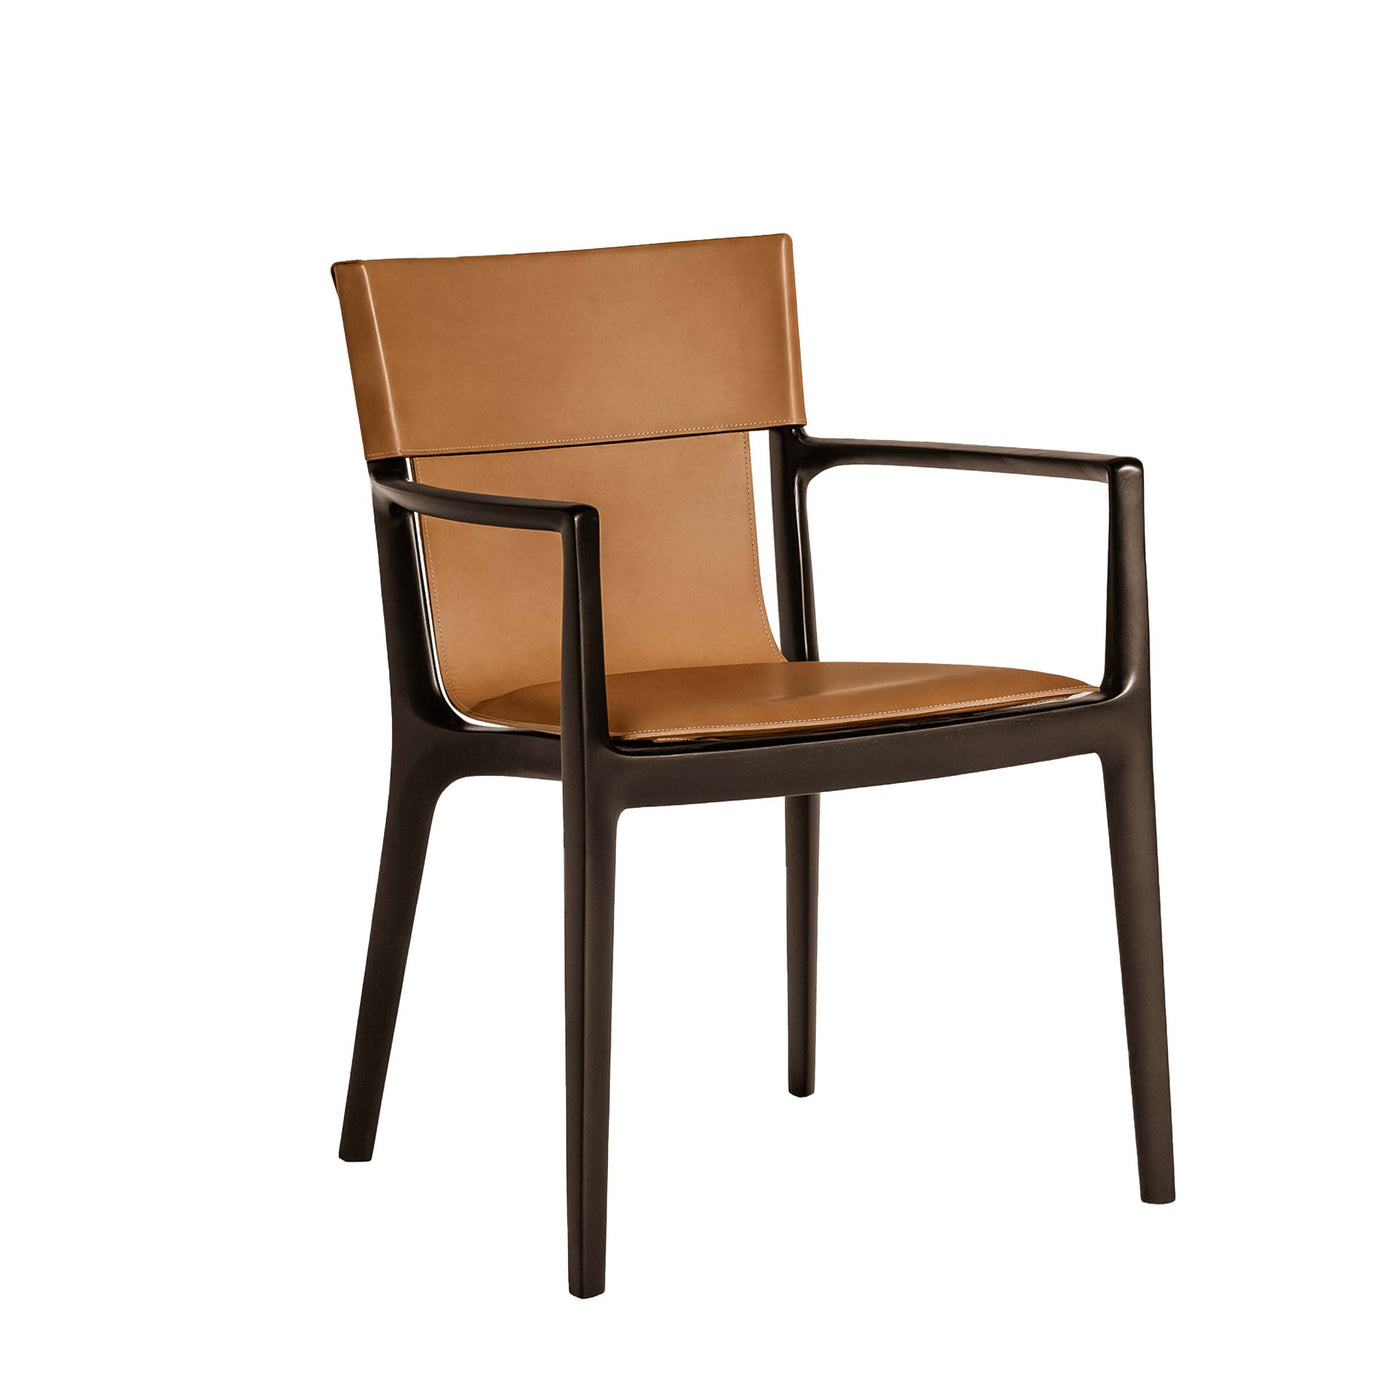 Leather Dining Chair ISADORA by Roberto Lazzeroni for Poltrona Frau 012